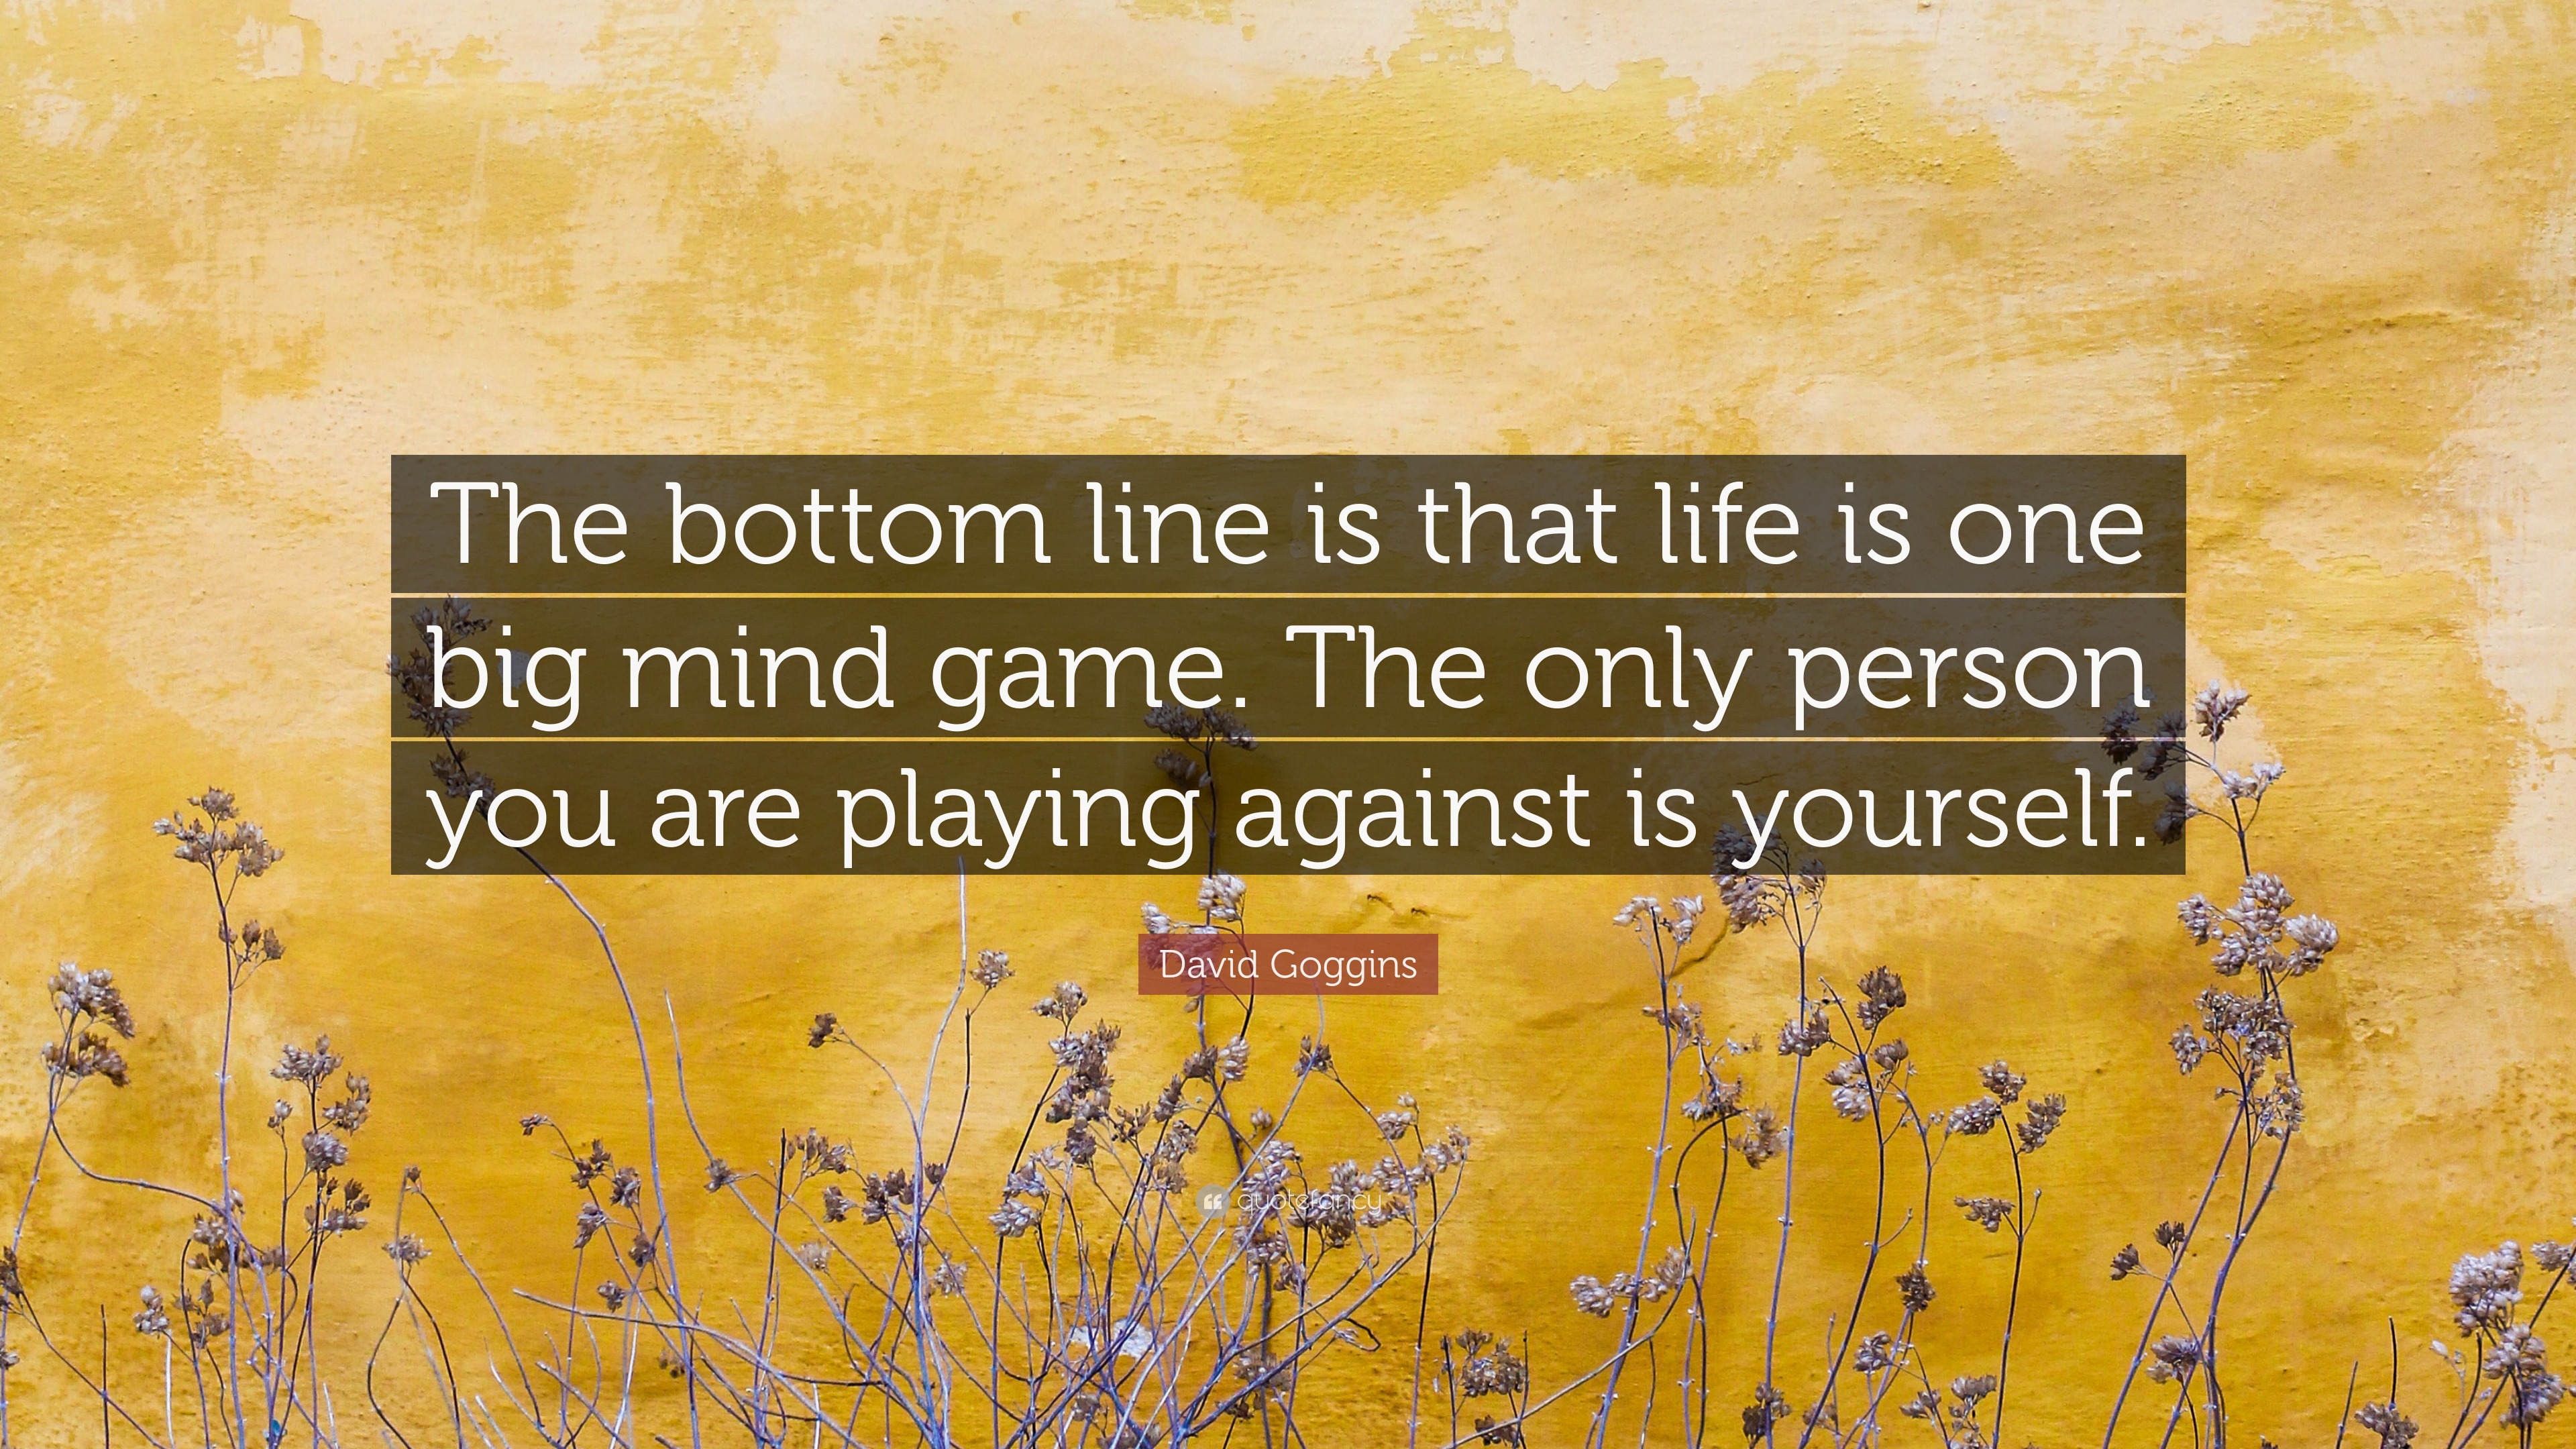 5 Reasons Playing Mind Games Only Hurts You